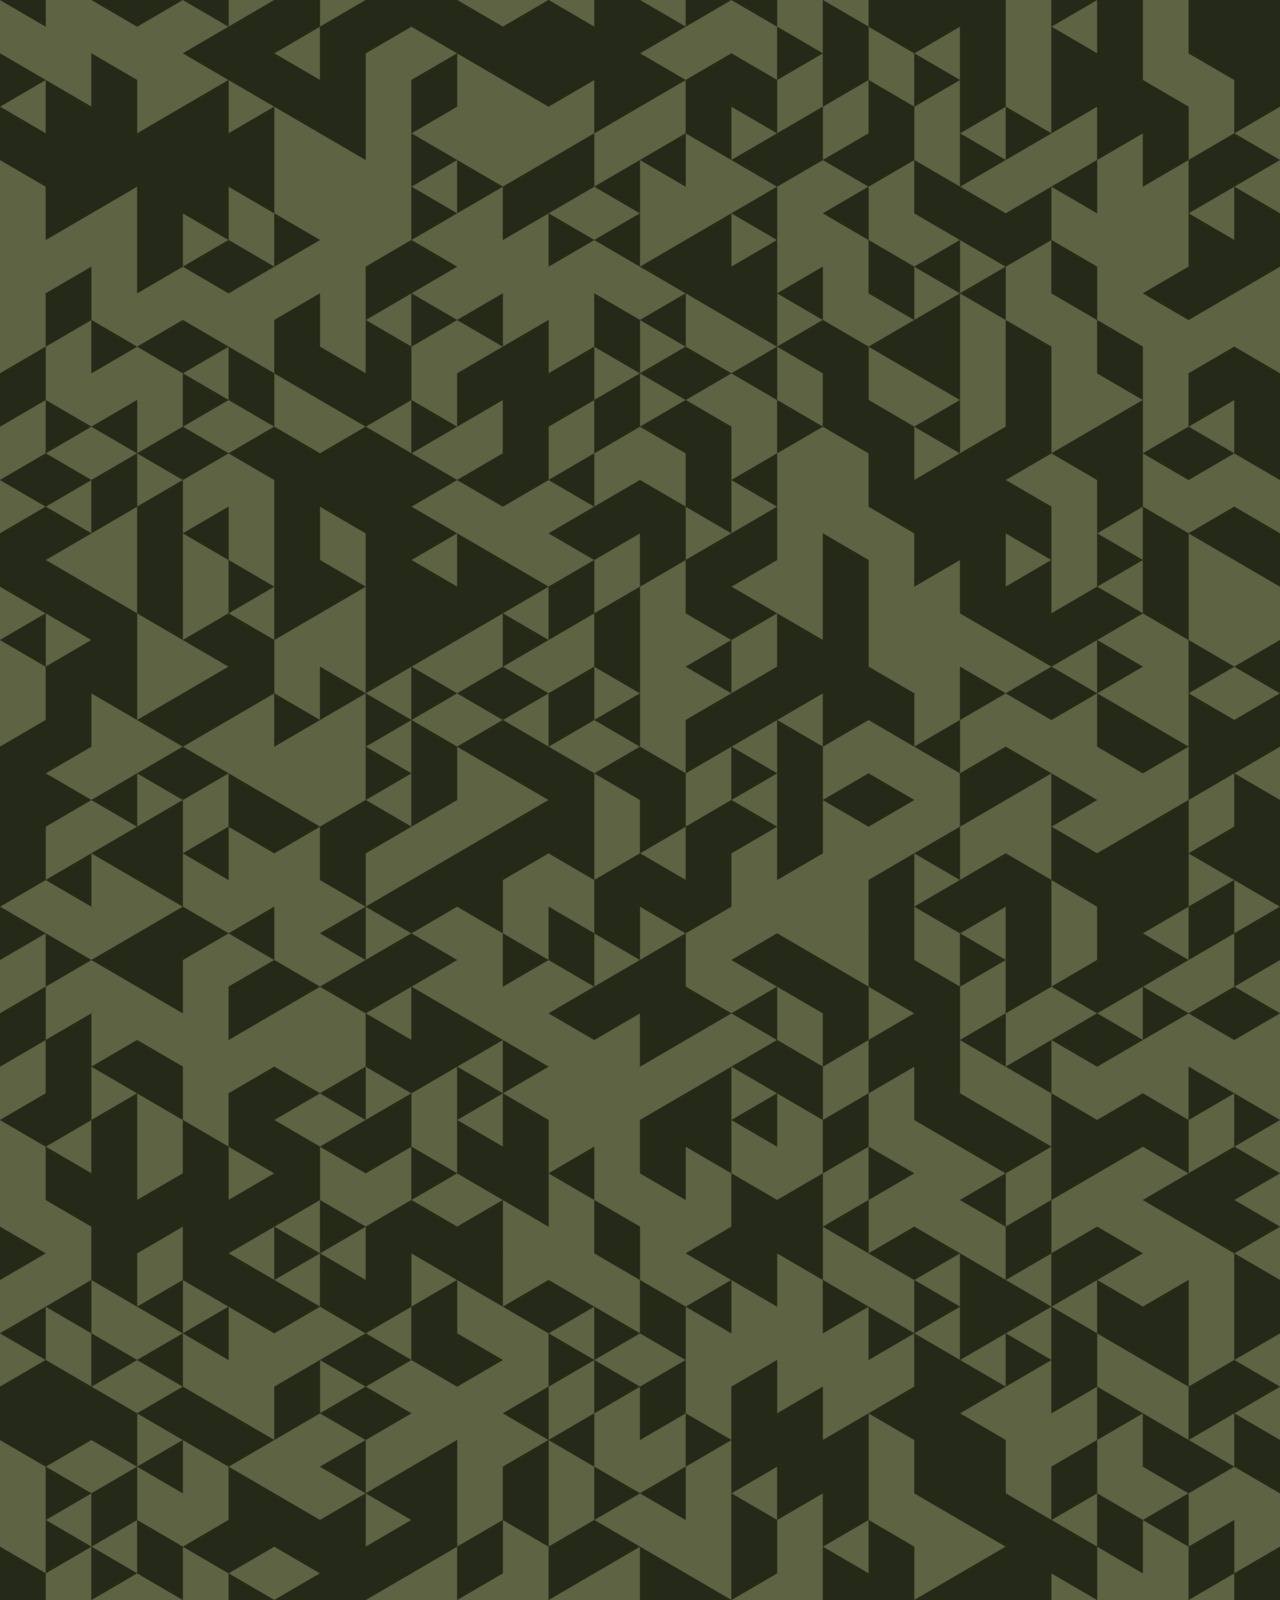 Camouflage pattern background seamless vector illustration. Military fashionable abstract geometric texture.